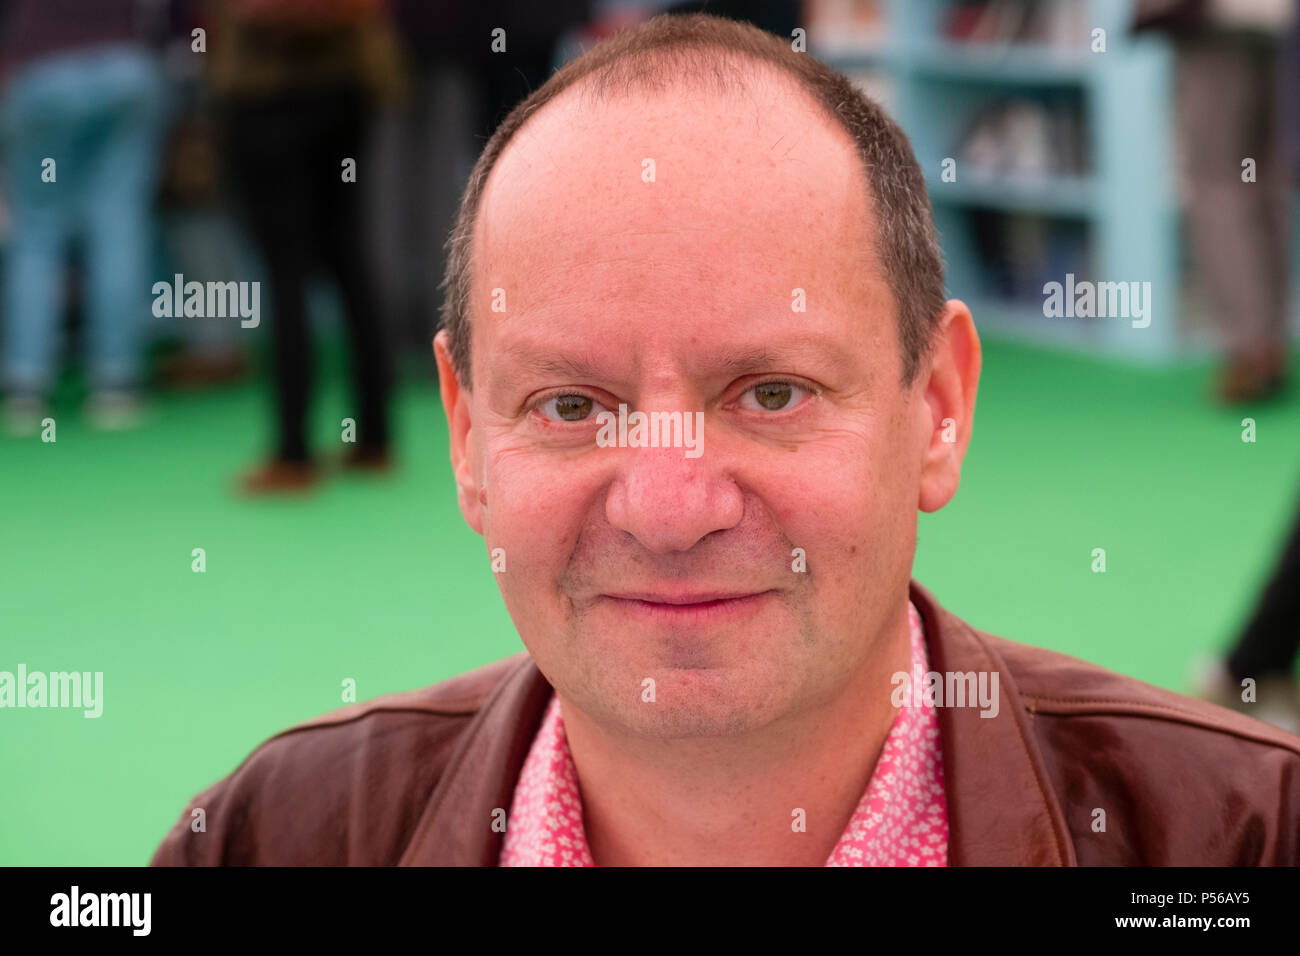 Philippe Sands, QC , British and French lawyer at Matrix Chambers, and Professor of Laws and Director of the Centre on International Courts and Tribunals at University College London  Photographed after delivering the  PEN Hay Lecture: Words, Memory and Imagination - 1945, and Today, at the Hay Festival 2018 Stock Photo